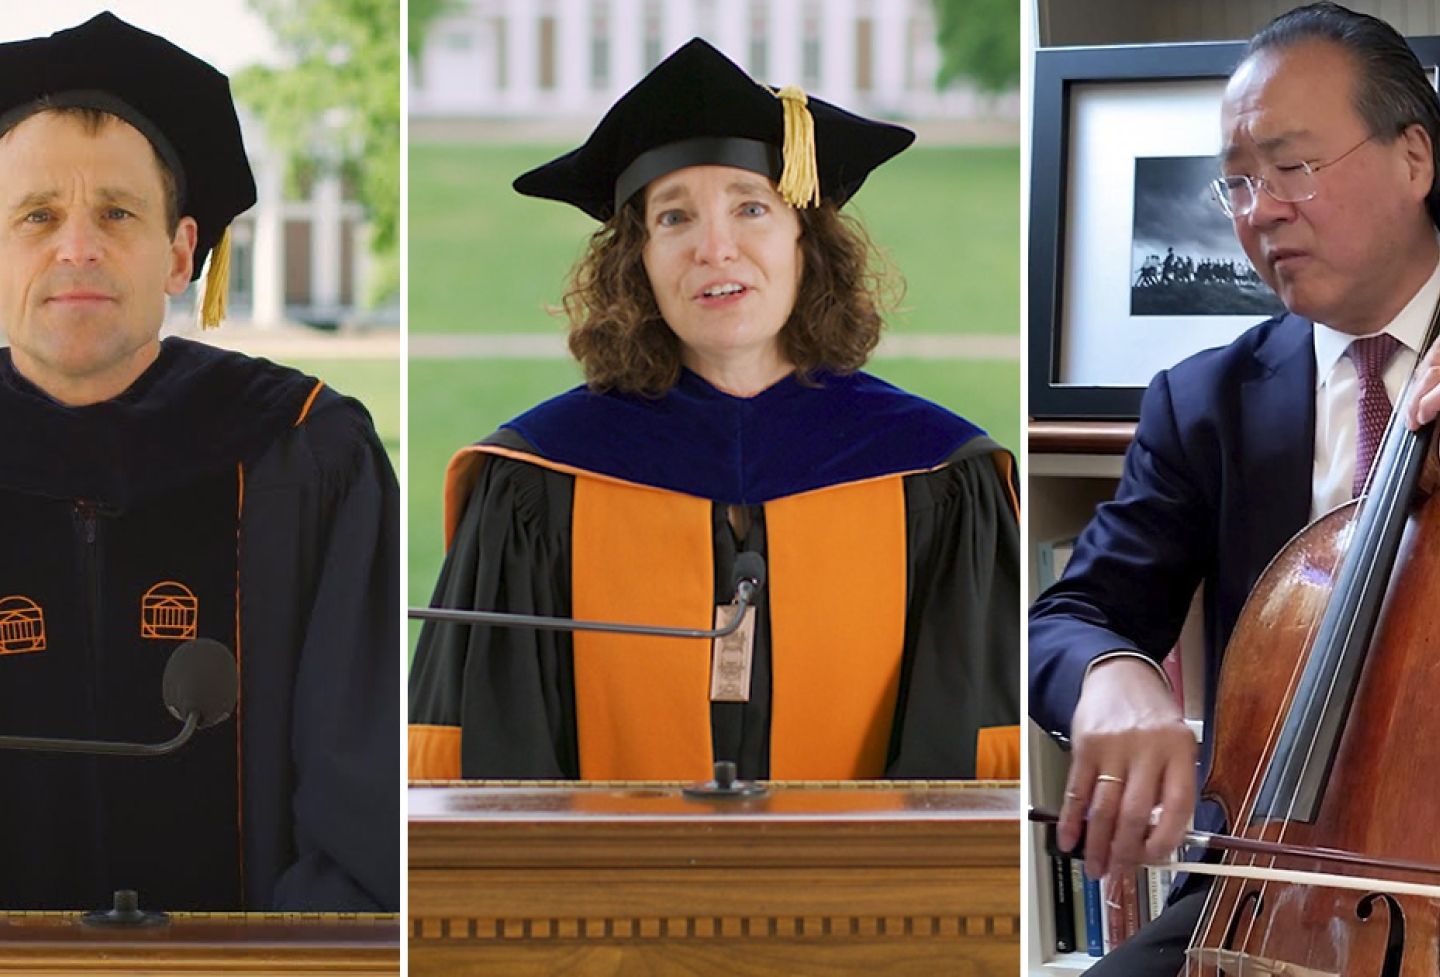 A virtual celebration May 16 honored UVA graduates with musical performances, videos and an address by President Jim Ryan ’92.